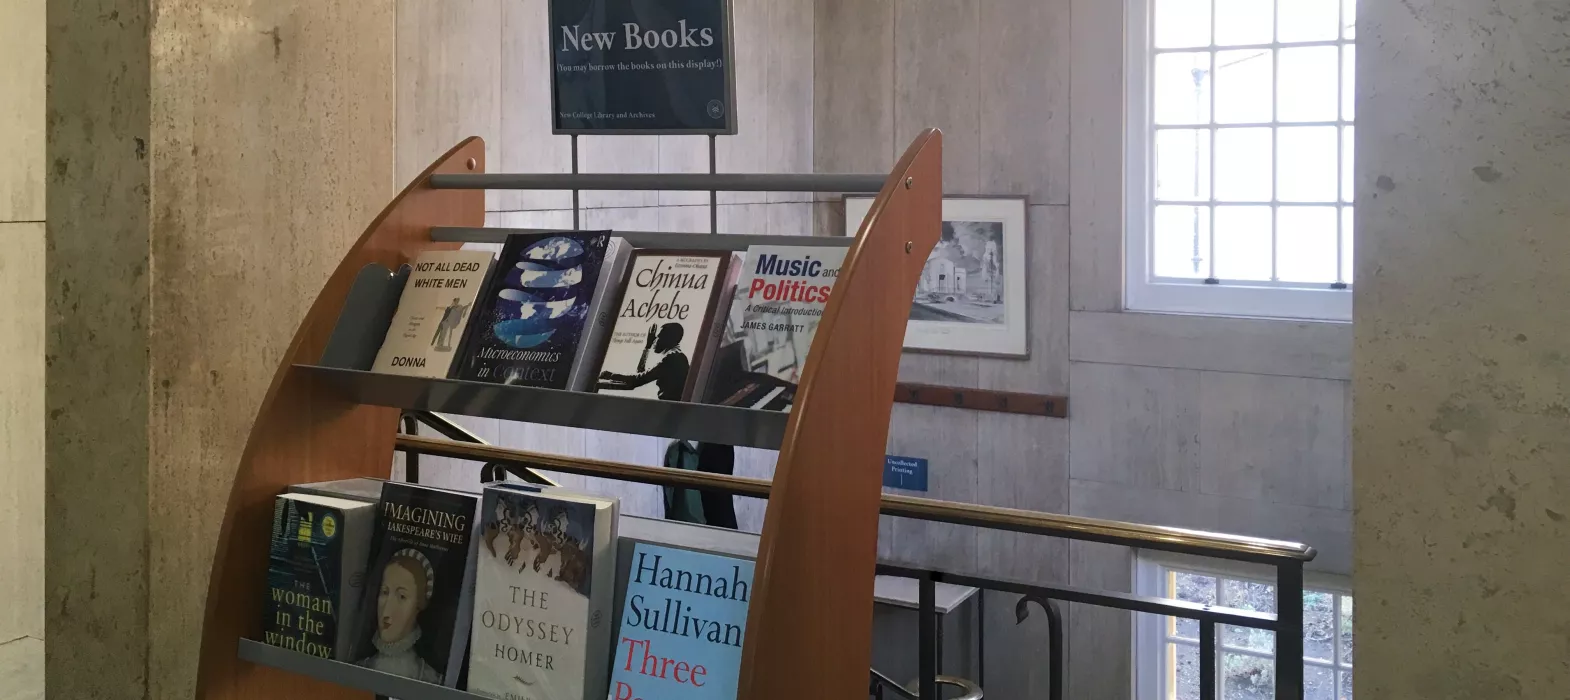 New Books Display, Entrance Hall, New College Library, Oxford